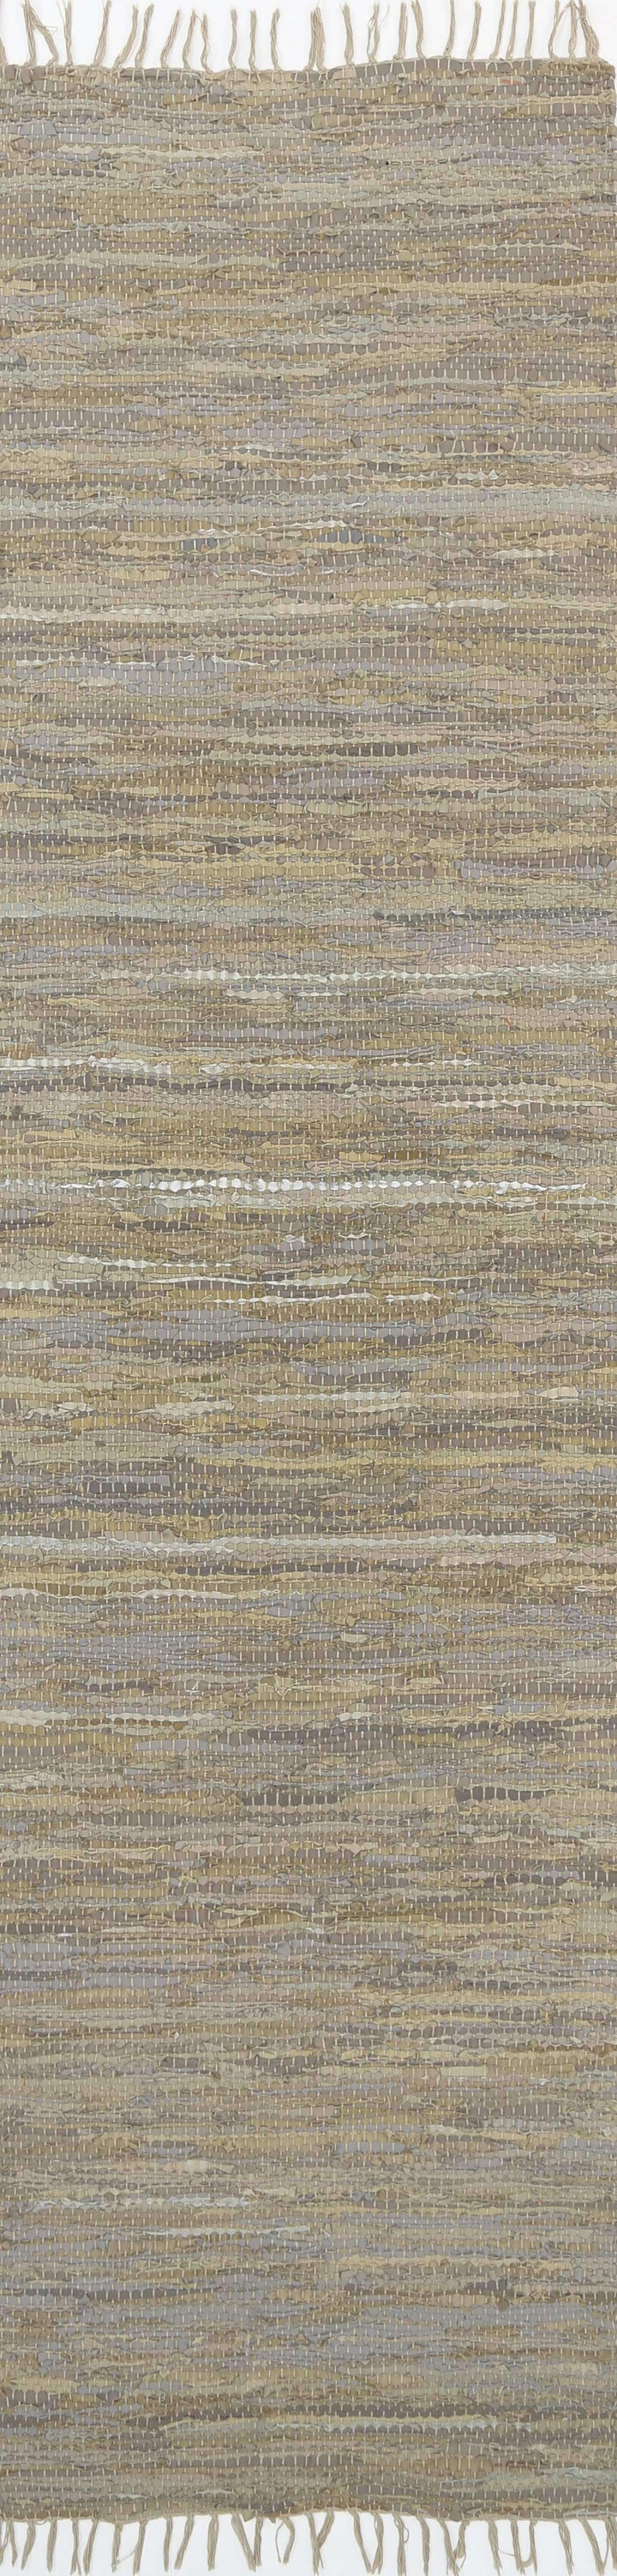 Nordic Modern Sage Leather Rug, [cheapest rugs online], [au rugs], [rugs australia]